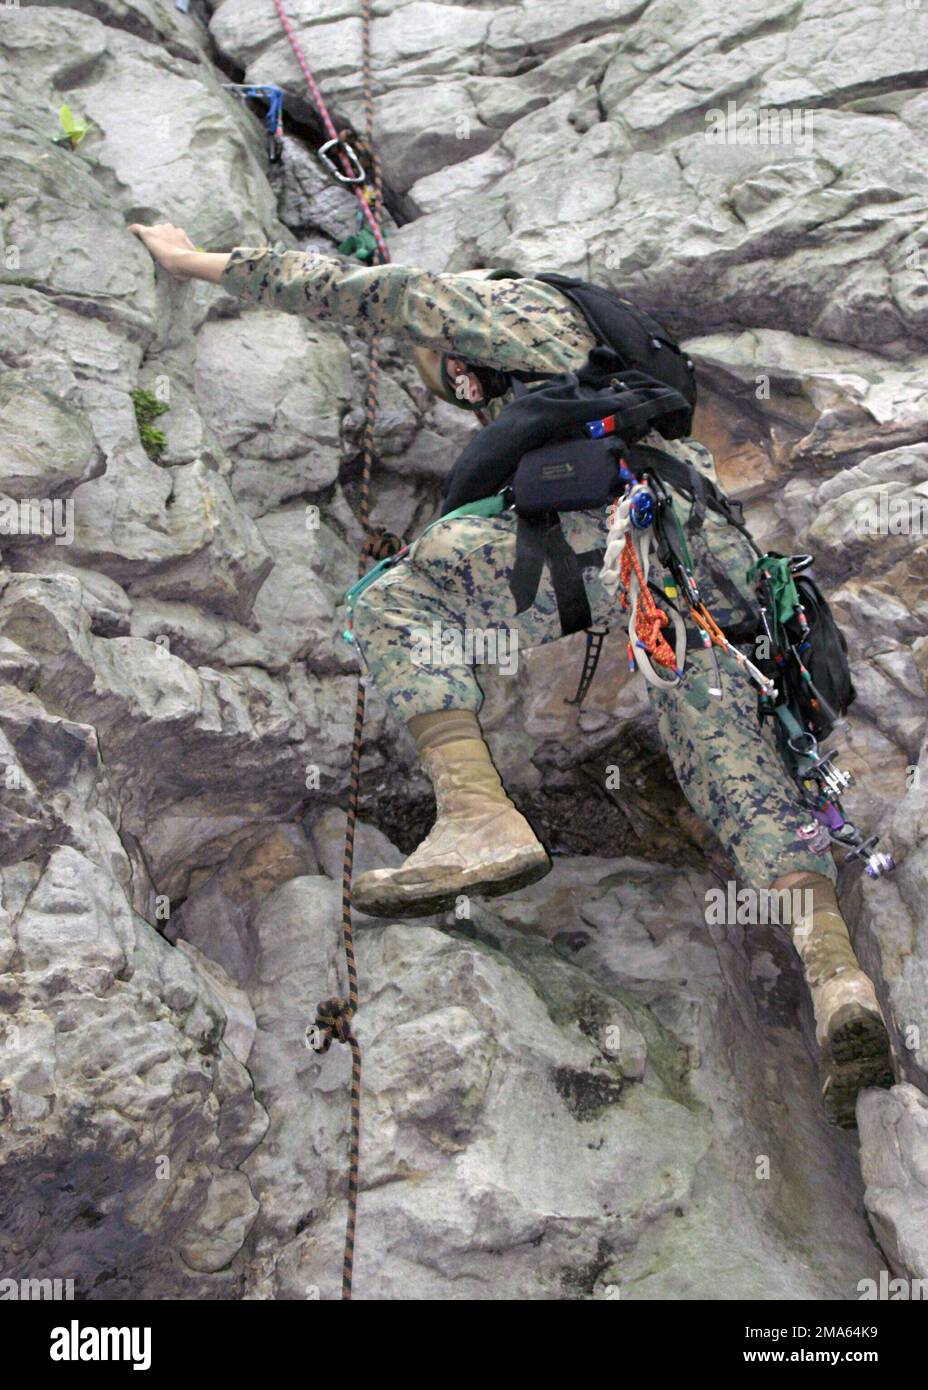 A US Marine Corps (USMC) Marine from 1ST Battalion, 2nd Marines climbs a rock wall during the Assault Climbers Course in Camp Dawson, West Virginia (WV). Marines from Battalion Landing Team (BLT) 1/2 are participating in the 6-week course. BLT 1/2 is the ground combat element of the 22nd Marine Expeditionary Unit (MEU). Base: Camp Dawson State: West Virginia (WV) Country: United States Of America (USA) Stock Photo